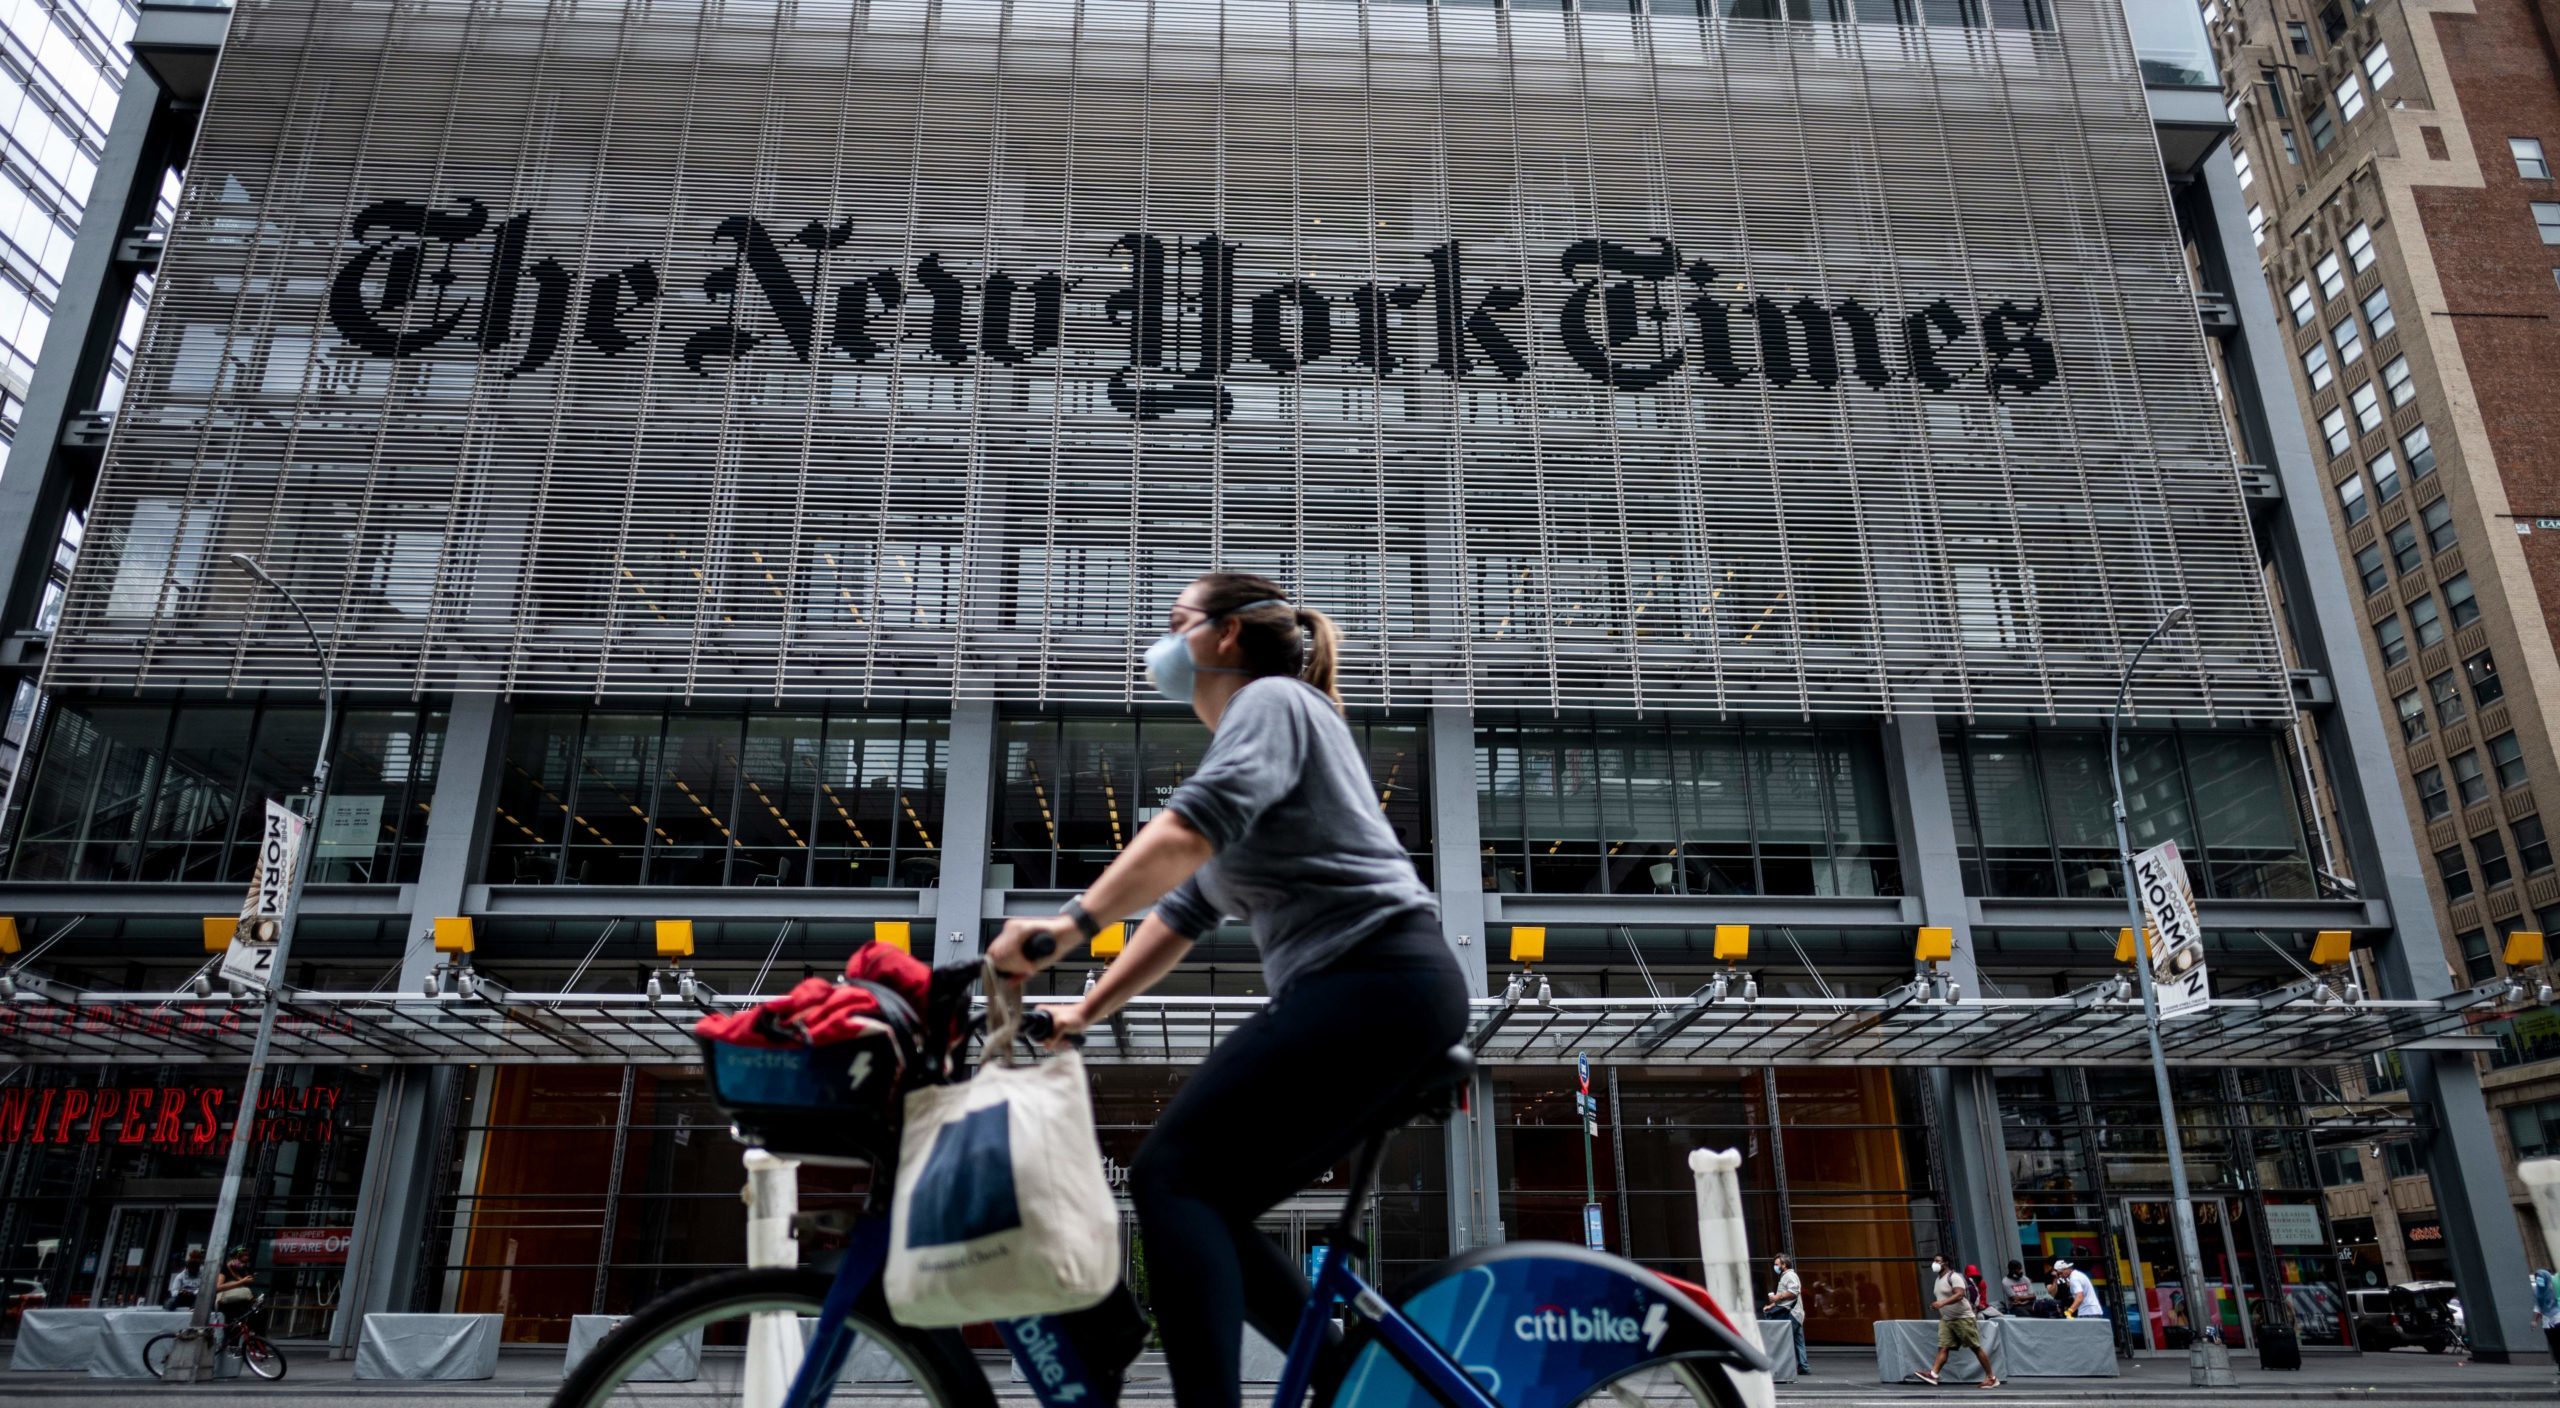 The New York Times building is seen on June 30, 2020 in New York City. (Johannes Eisele/AFP via Getty Images)